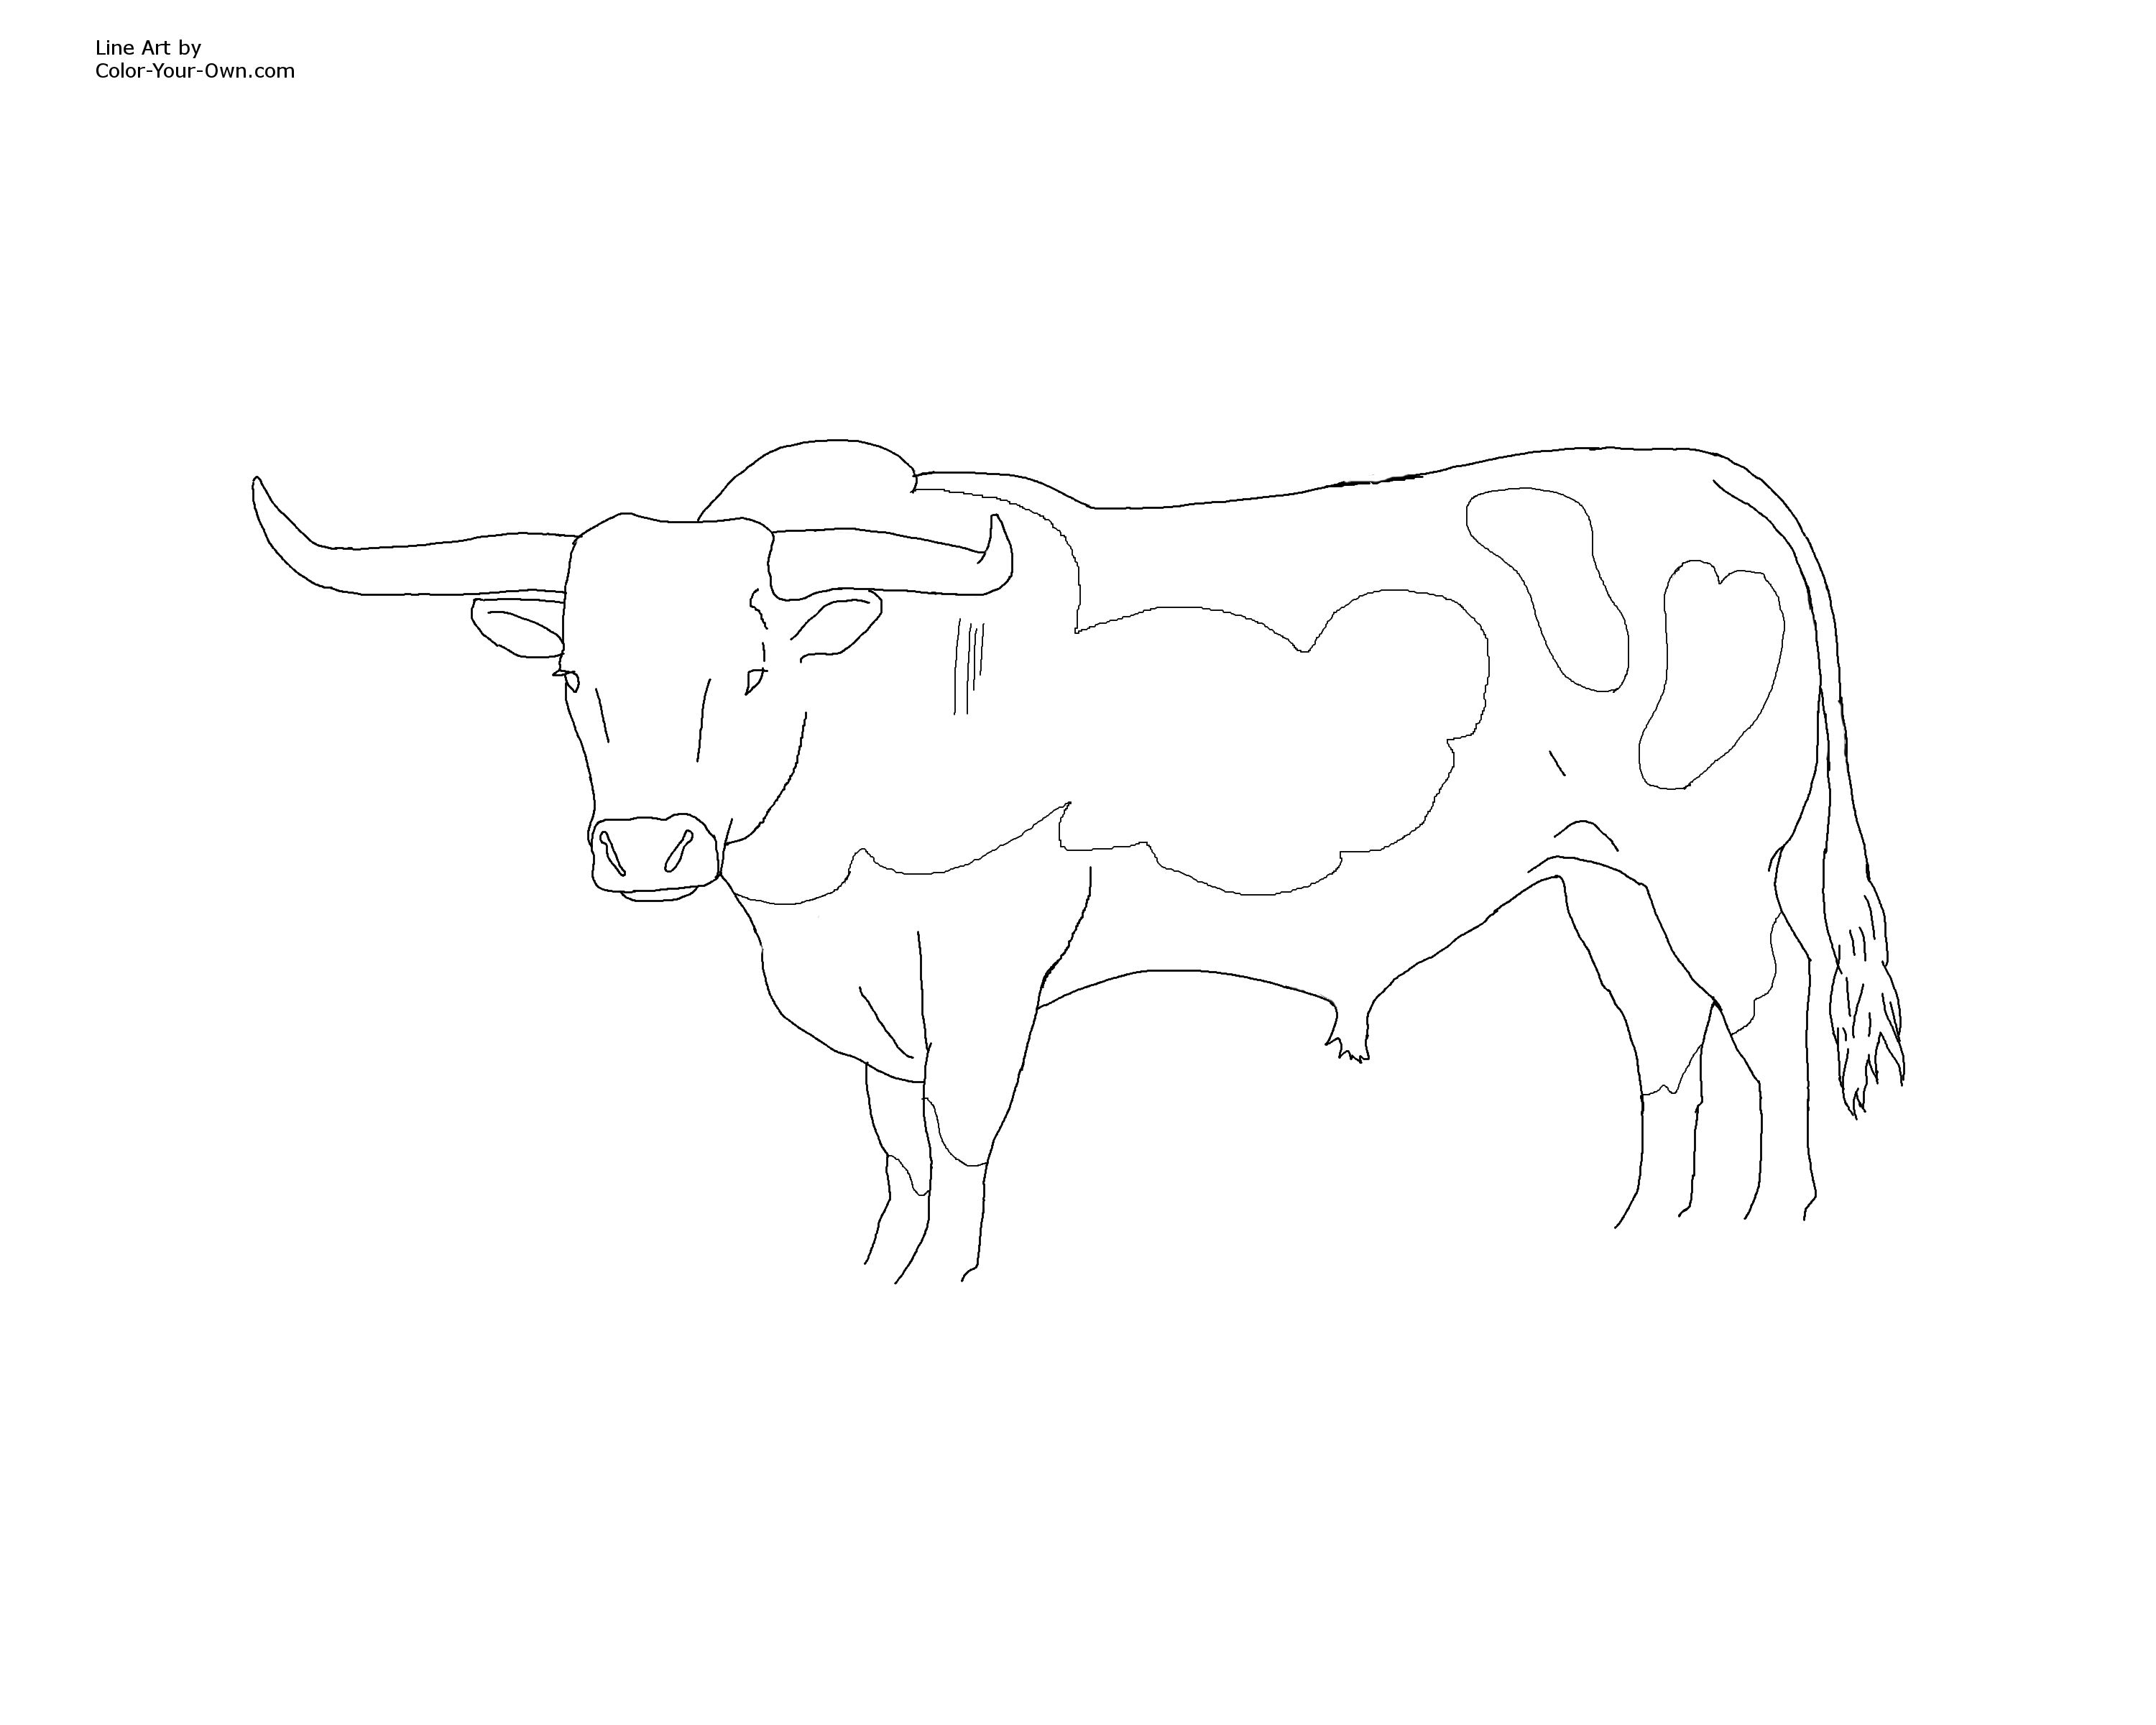 Longhorn Cattle coloring, Download Longhorn Cattle coloring for free 2019